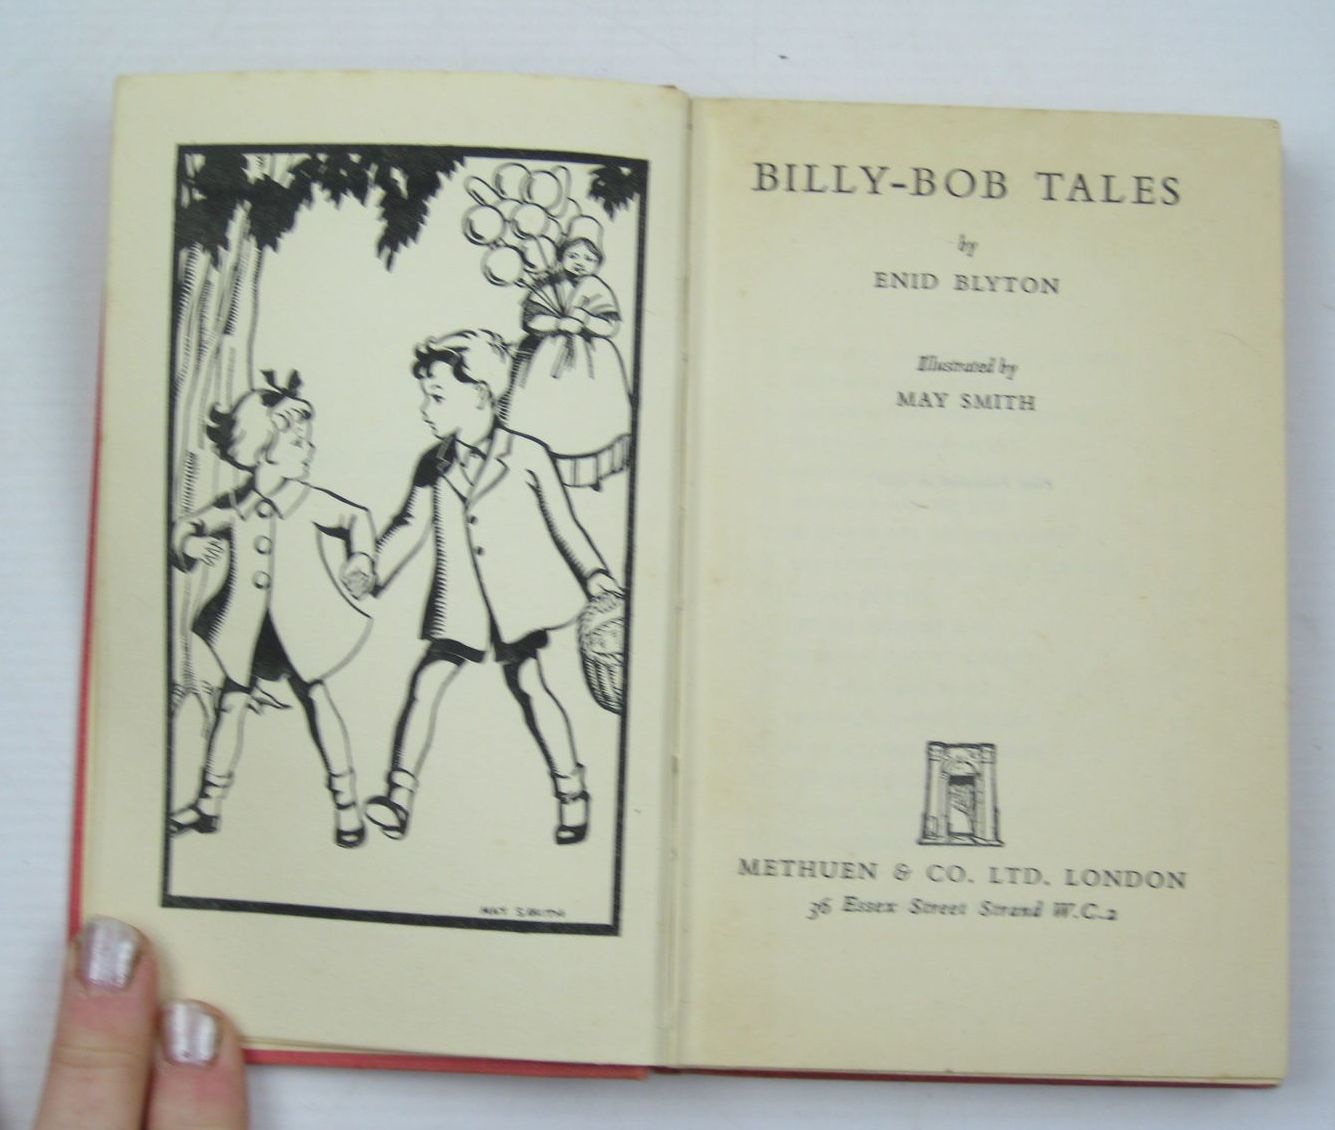 Photo of BILLY-BOB TALES written by Blyton, Enid illustrated by Smith, May published by Methuen & Co. Ltd. (STOCK CODE: 1311995)  for sale by Stella & Rose's Books